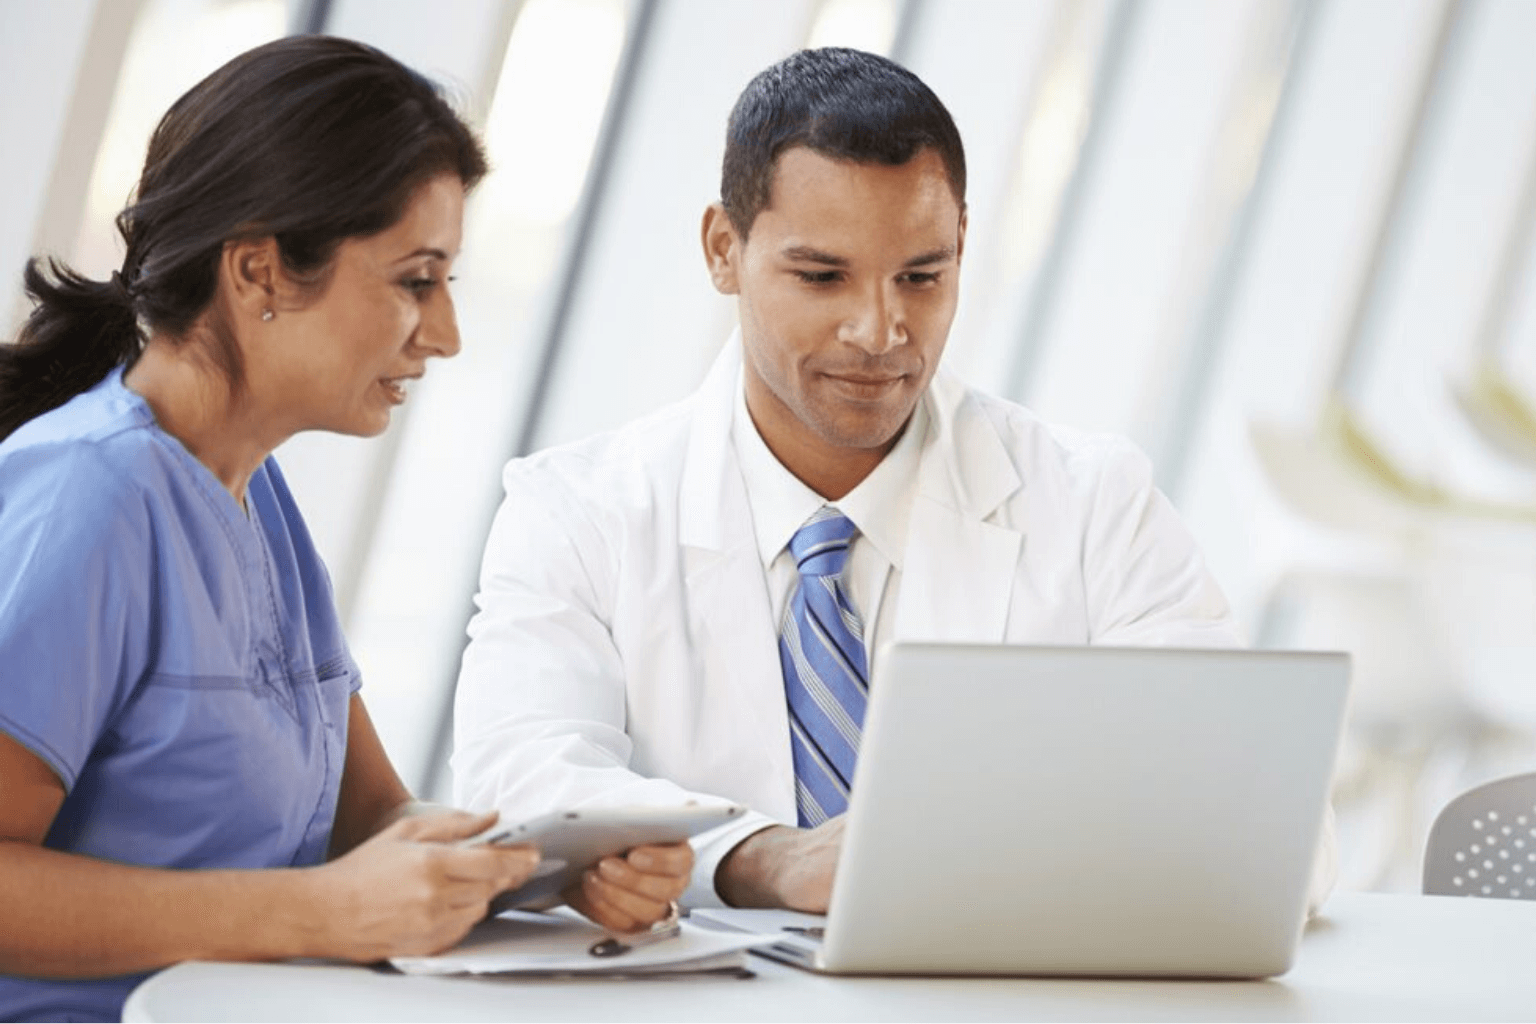 Two medical professionals looking at a laptop